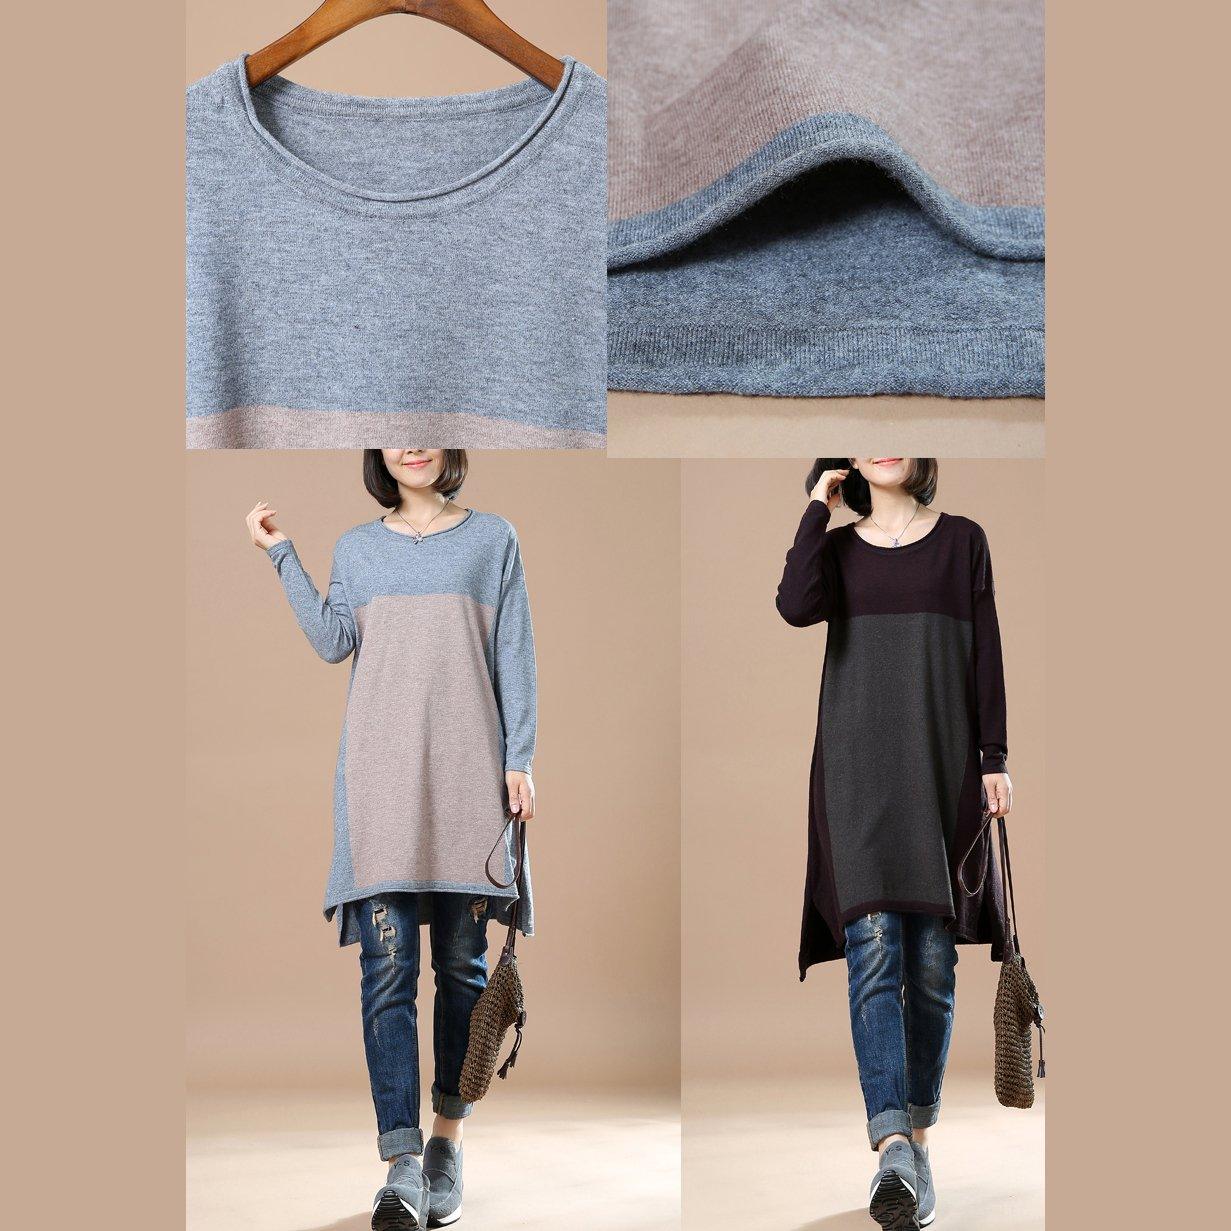 Gray long sweater plus size winter dresses - Omychic